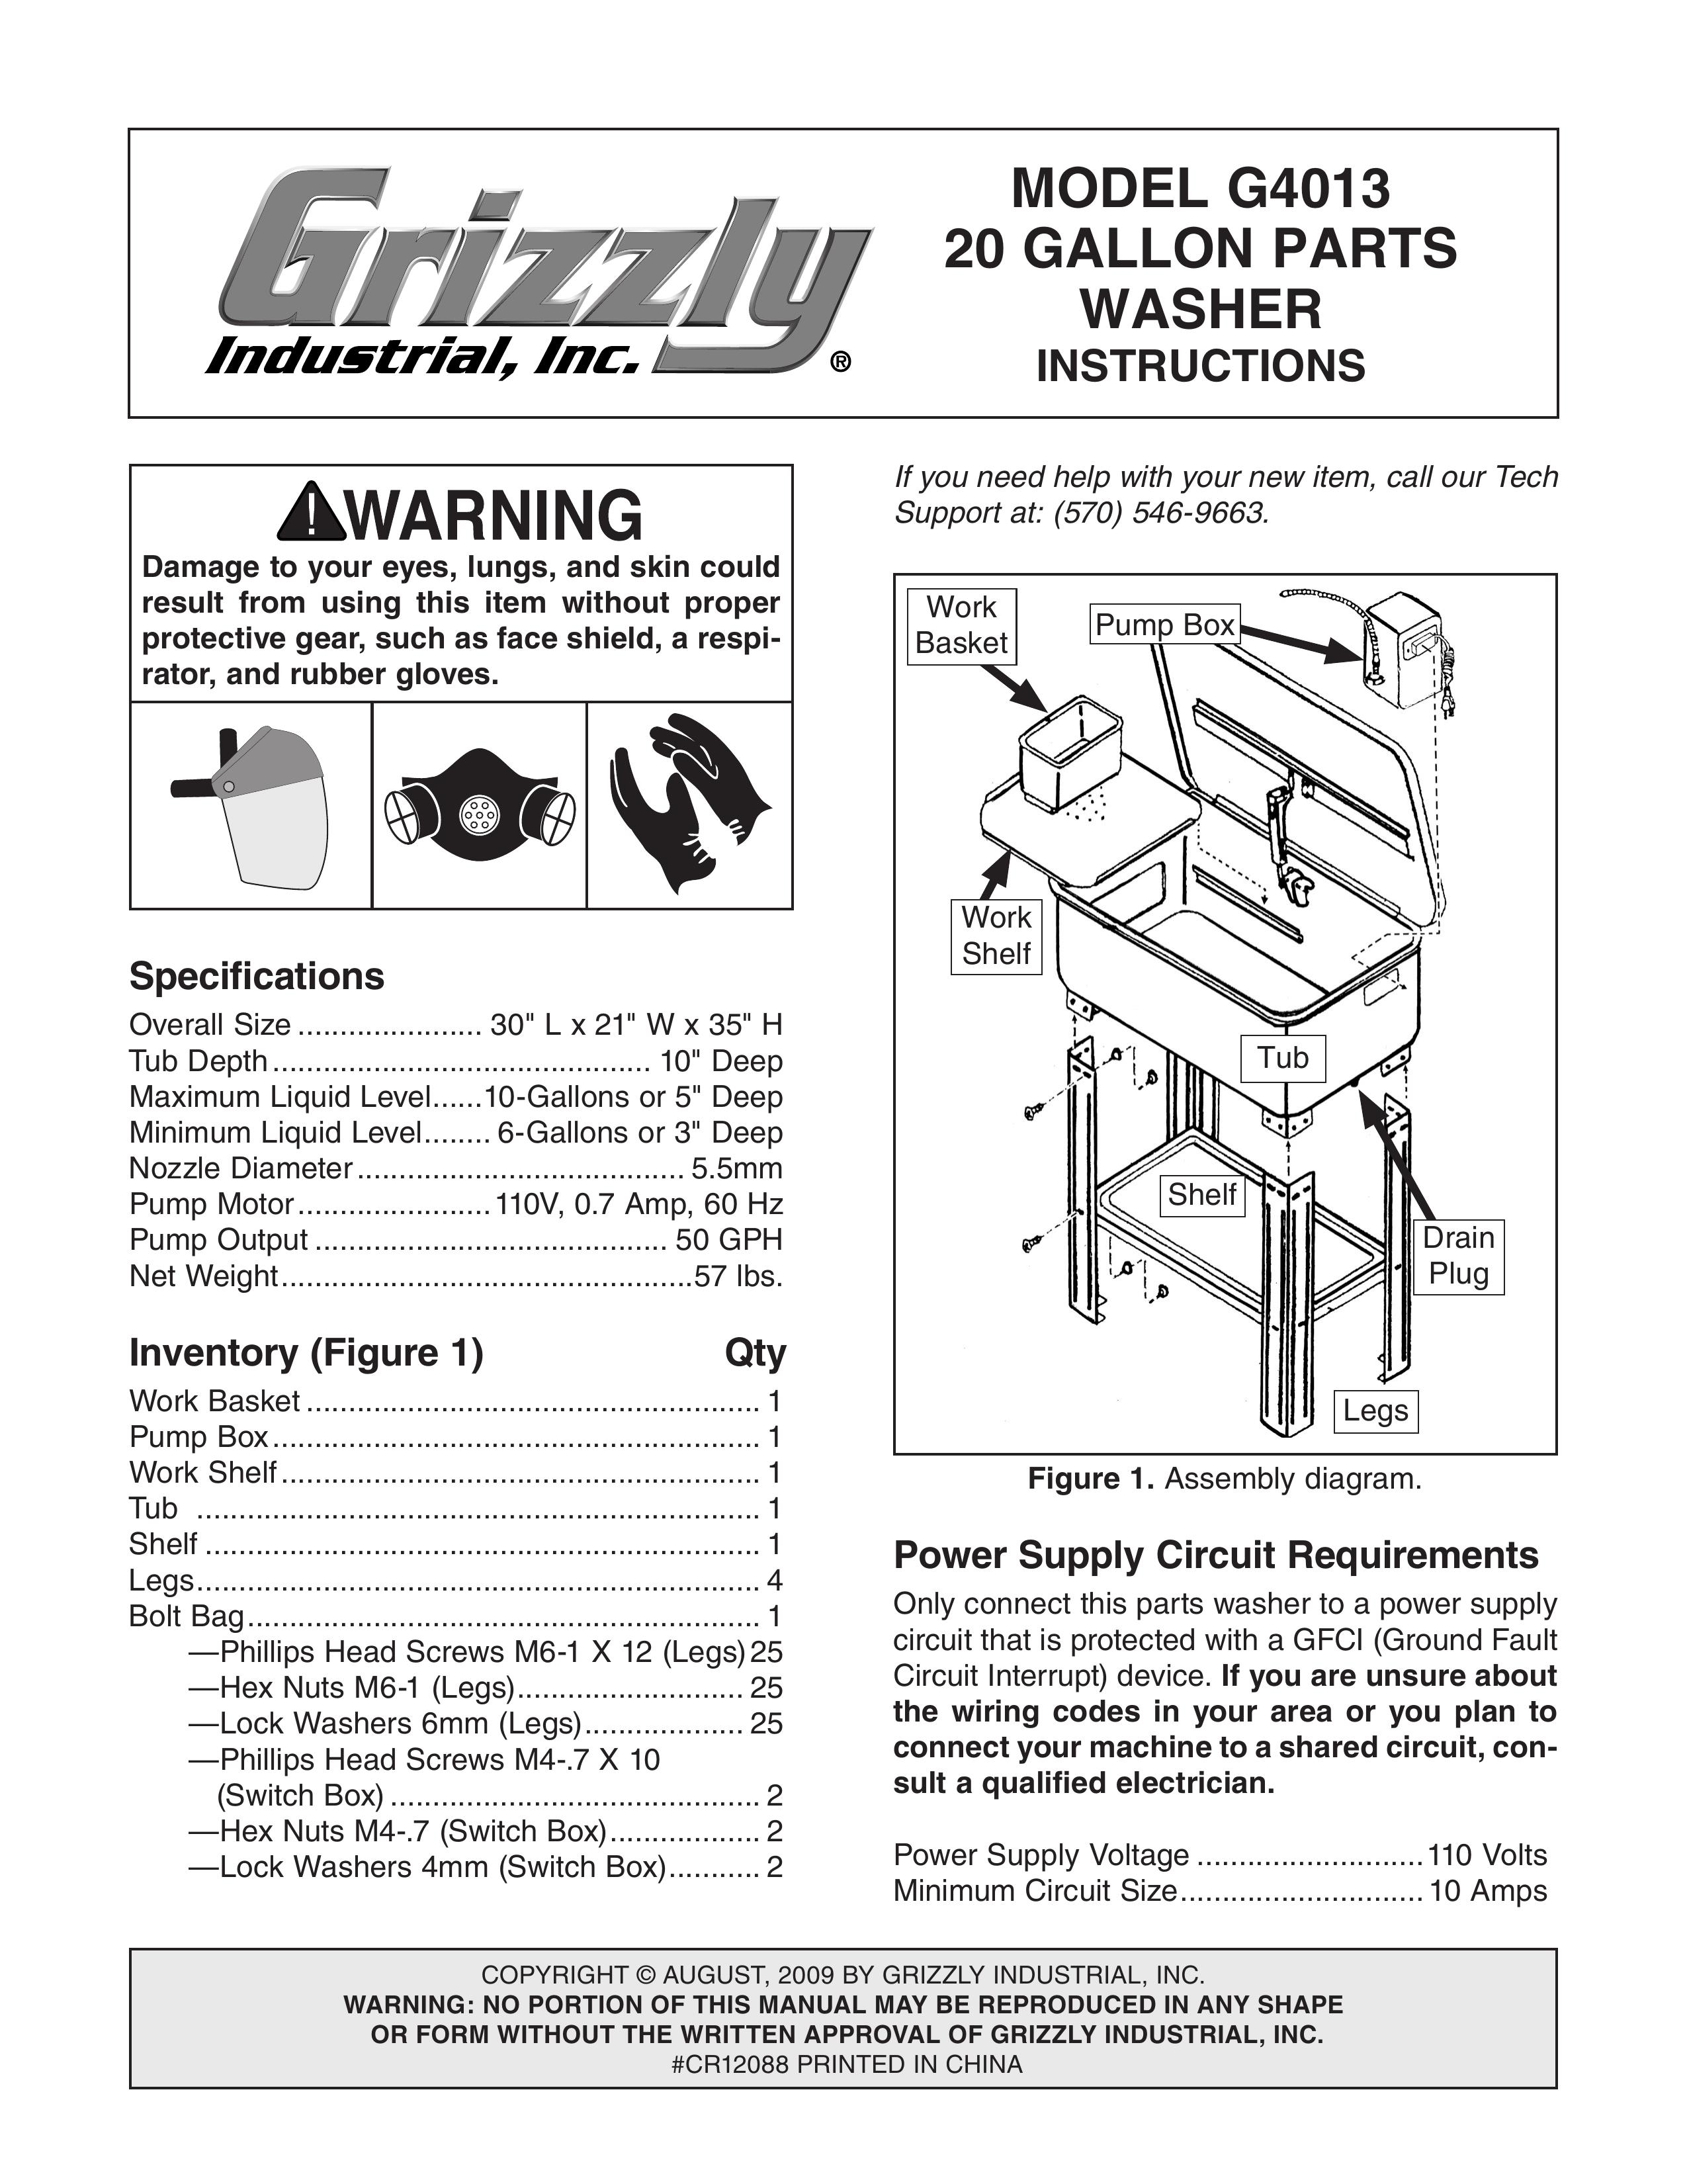 Grizzly G4013 Washer User Manual